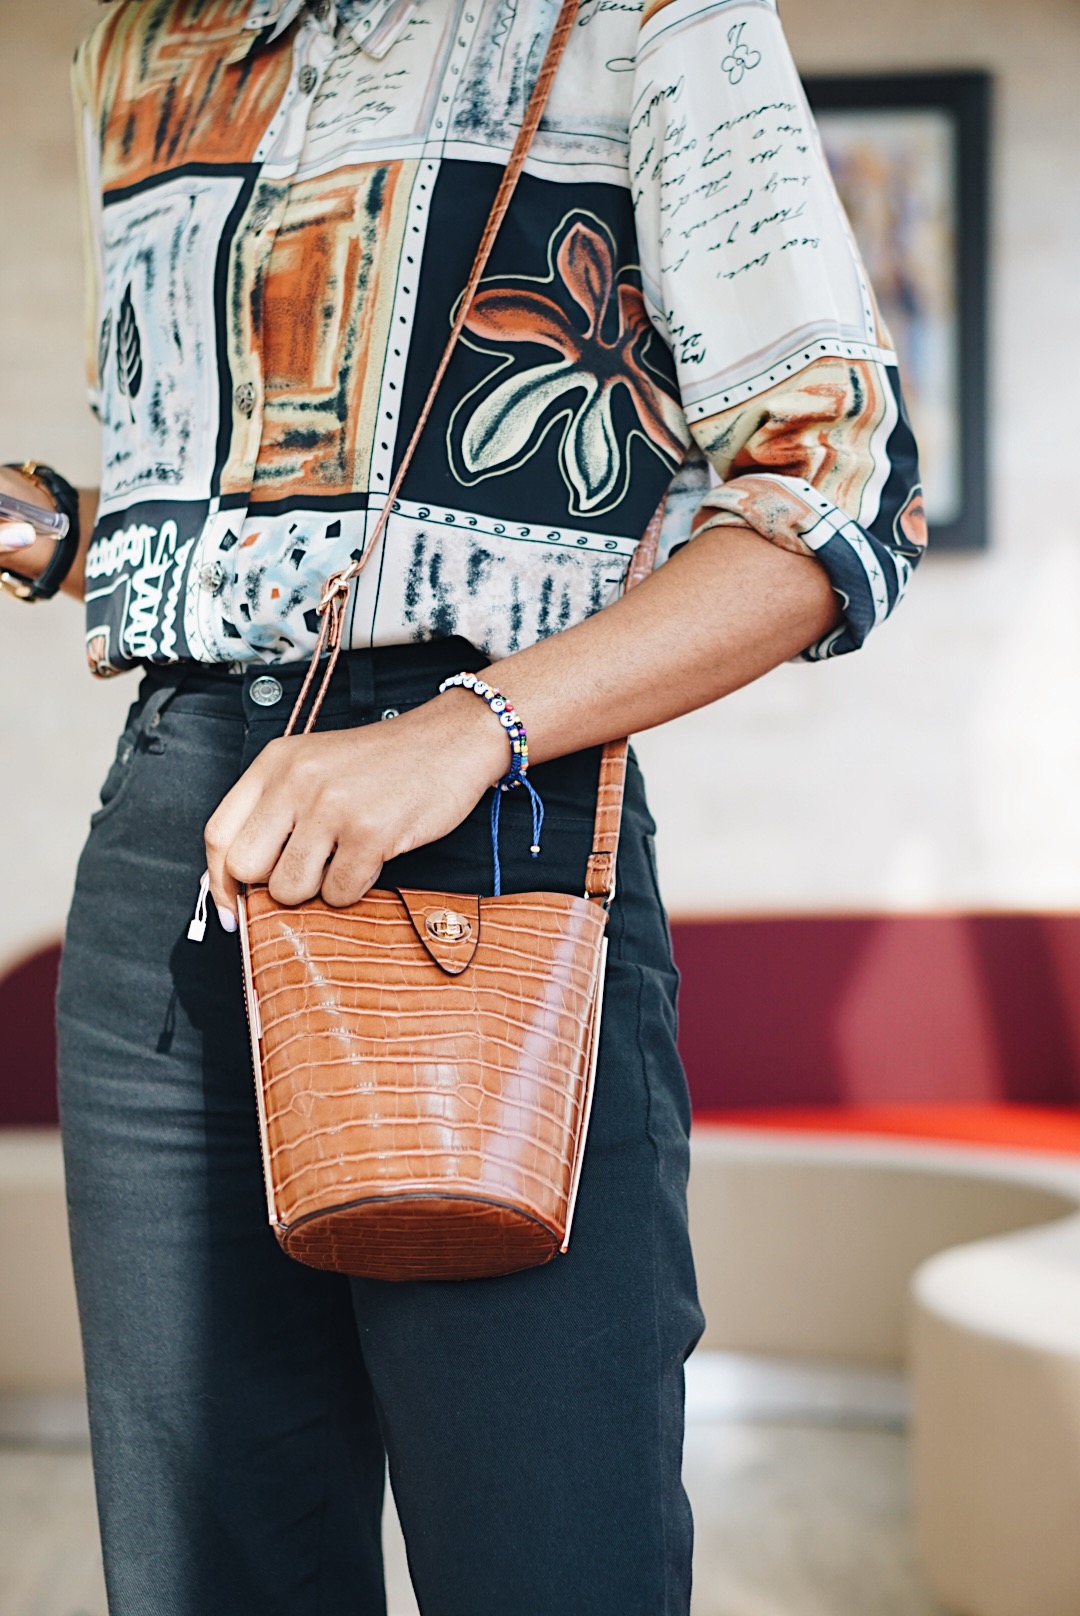 Cassie Daves wearing a vintage print shirt and brown mini bucket bag